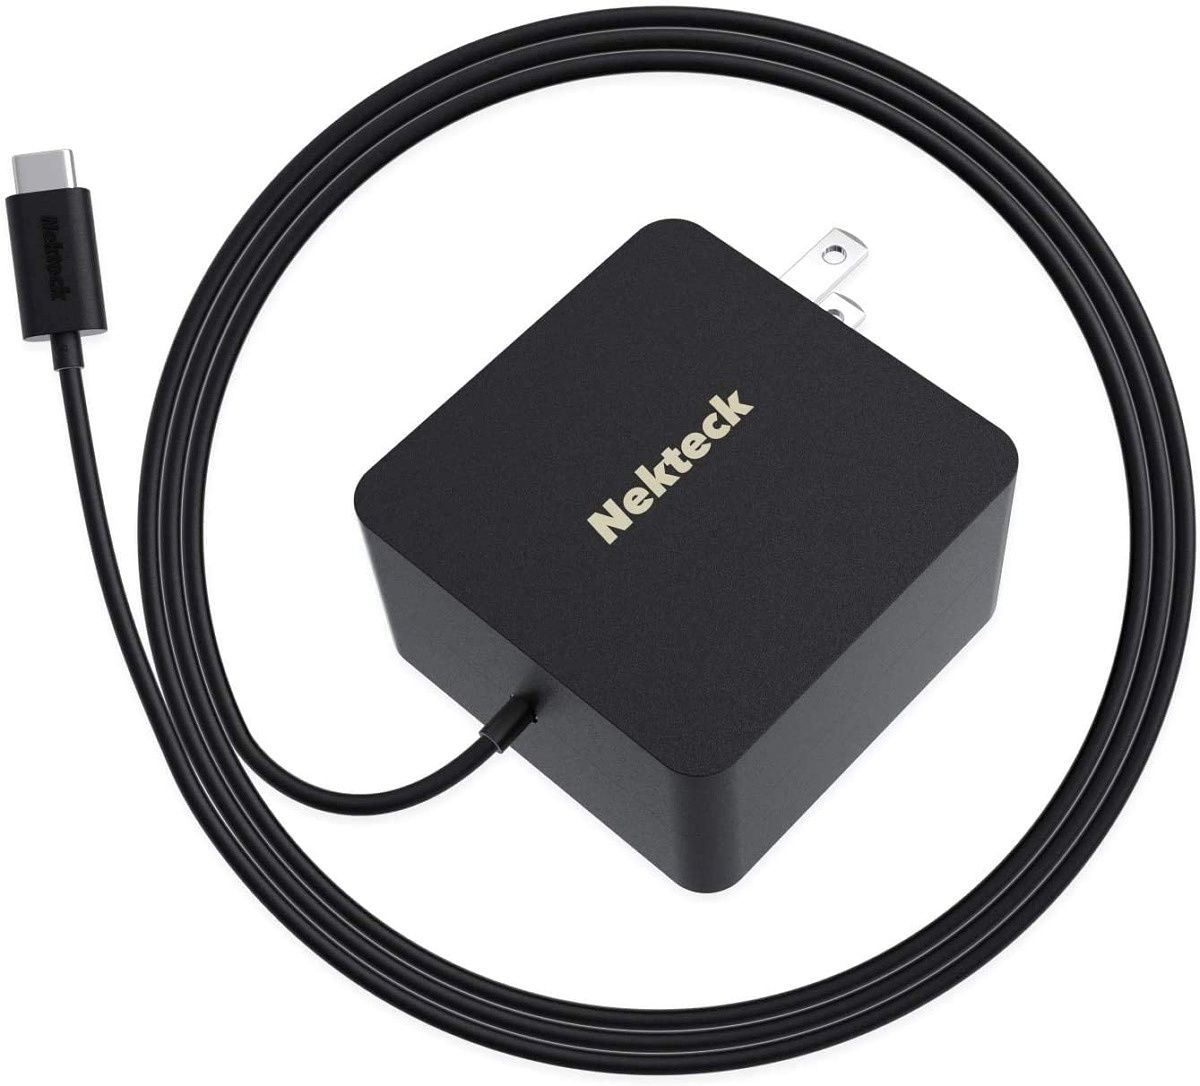 The Nekteck charger supports up to 45W charging using USB PD 3.0 and PPS standards. It has a permanently attached Type-C cable that's quite handy. In addition, the charger is USB IF certified and packs several safeguards against over-charging, over-current, and over-heating.